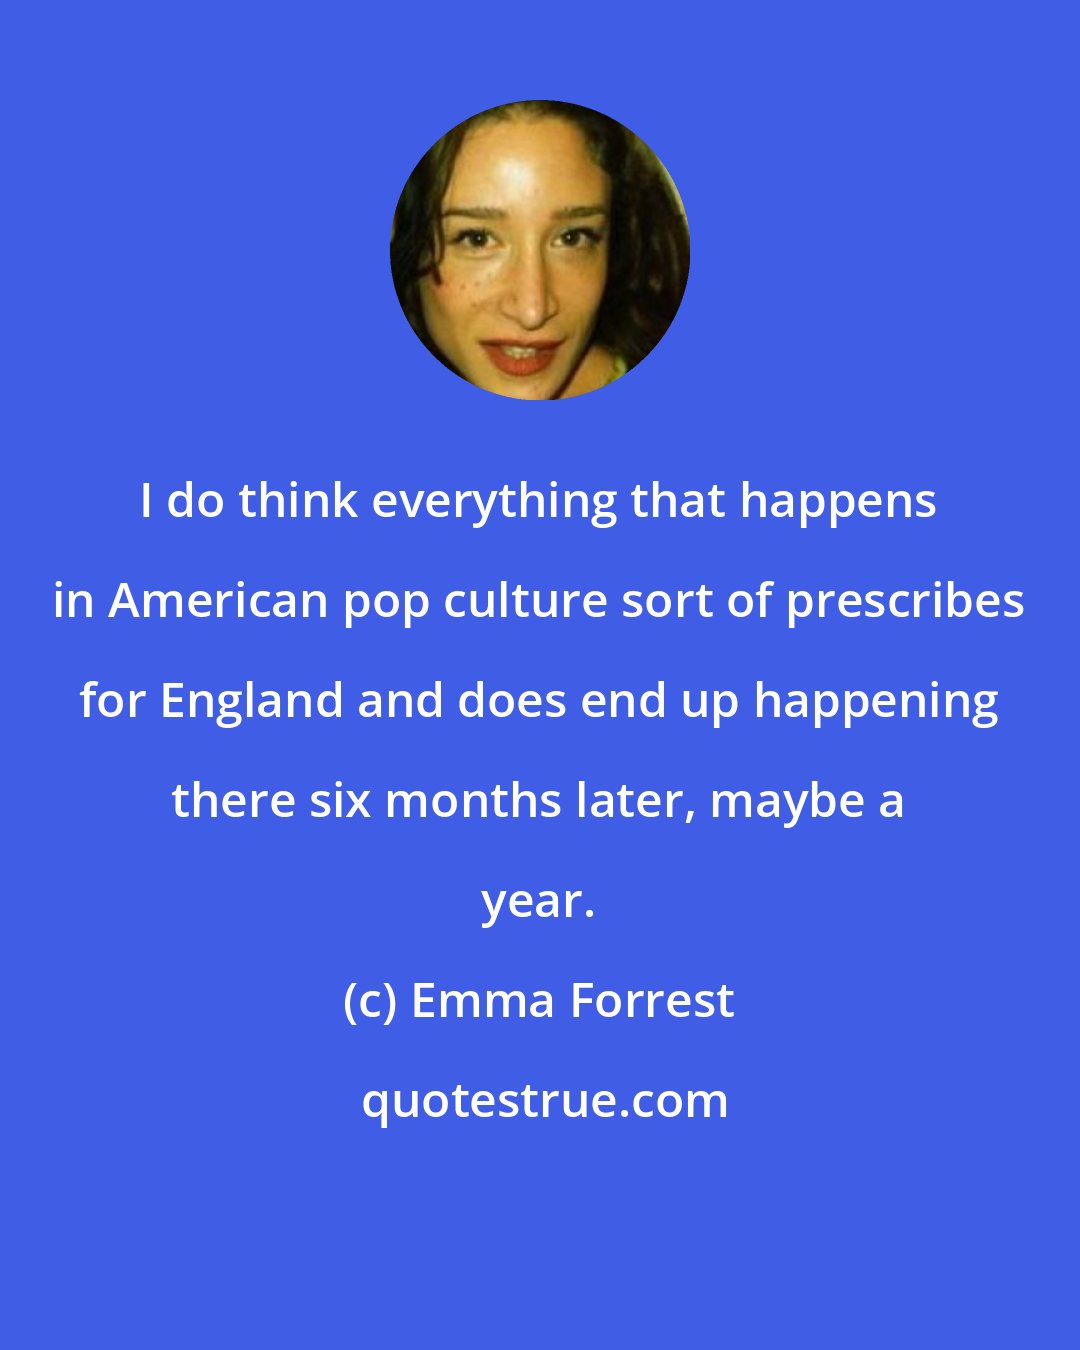 Emma Forrest: I do think everything that happens in American pop culture sort of prescribes for England and does end up happening there six months later, maybe a year.